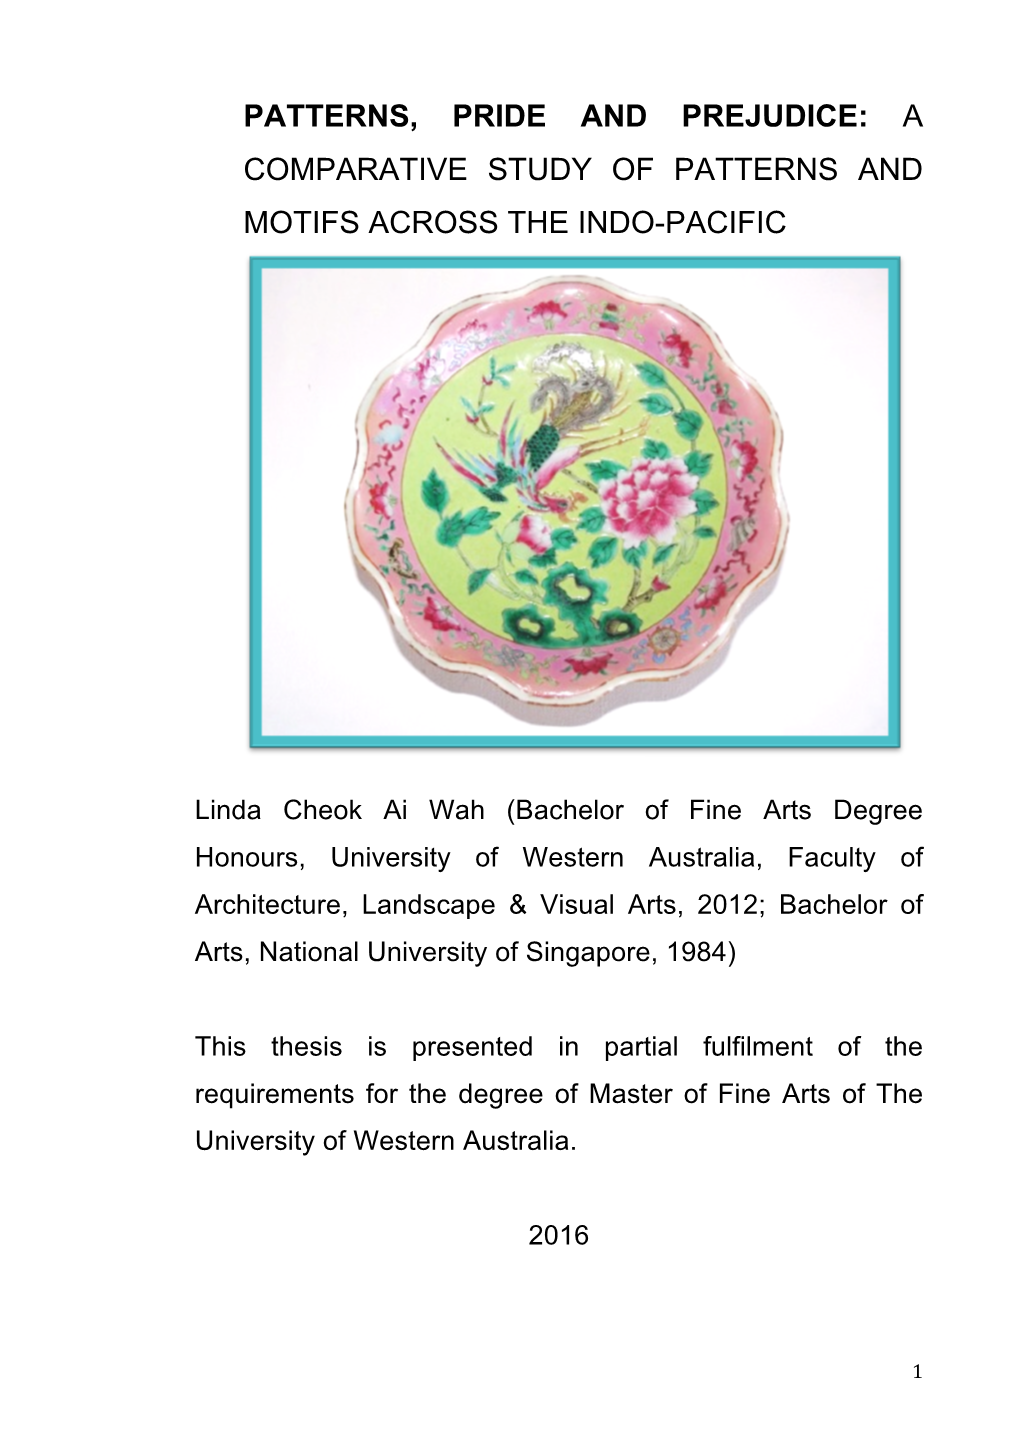 Thesis Is Presented in Partial Fulfilment of the Requirements for the Degree of Master of Fine Arts of the University of Western Australia